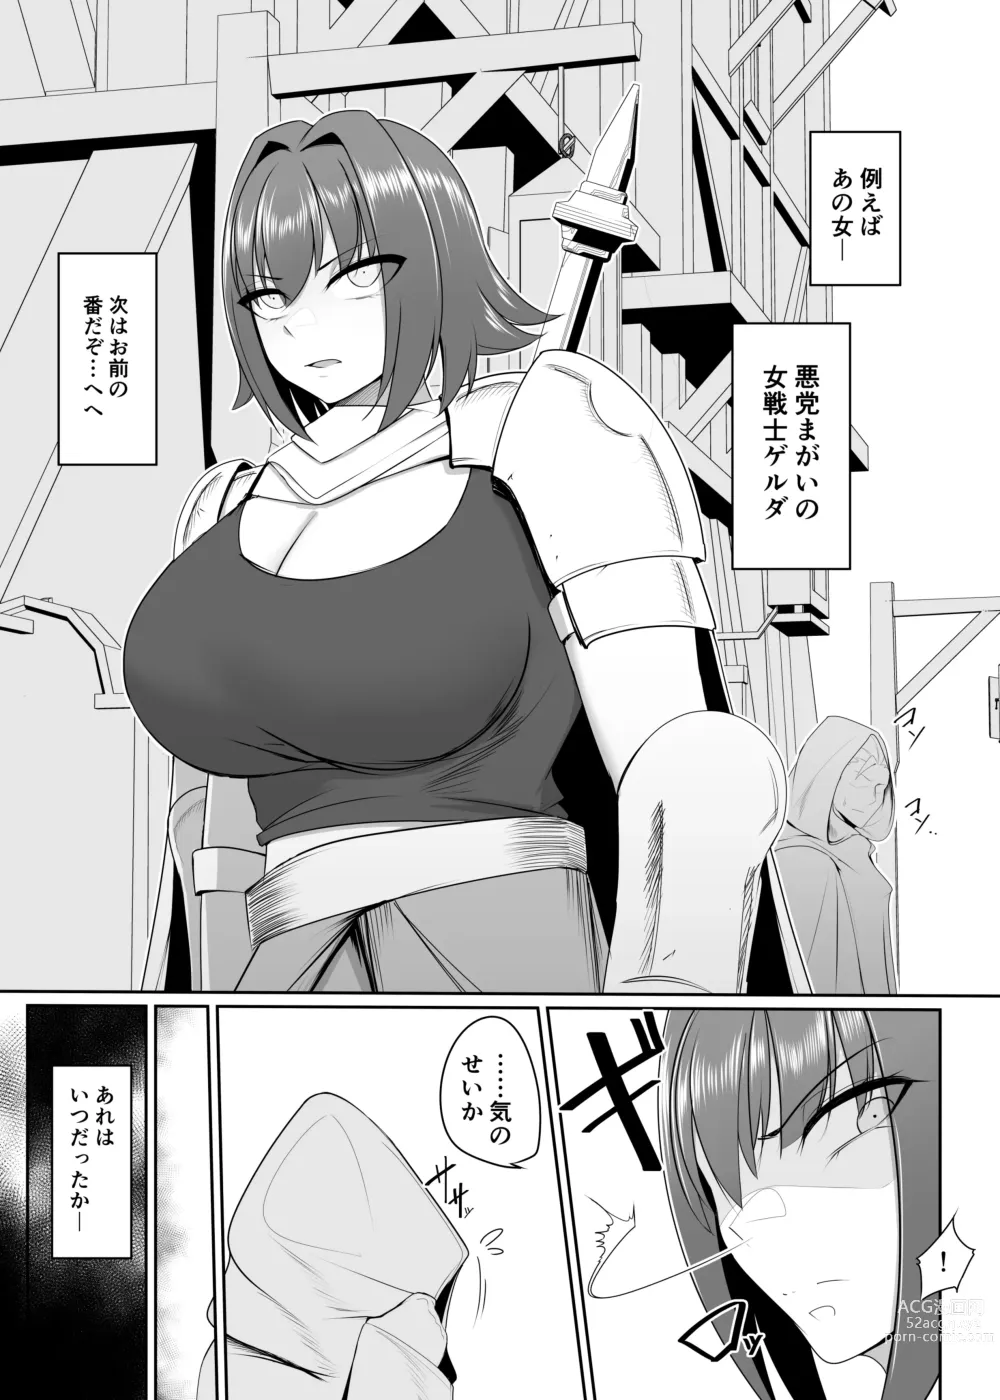 Page 3 of doujinshi Doll Turning Collar - Female Warrior